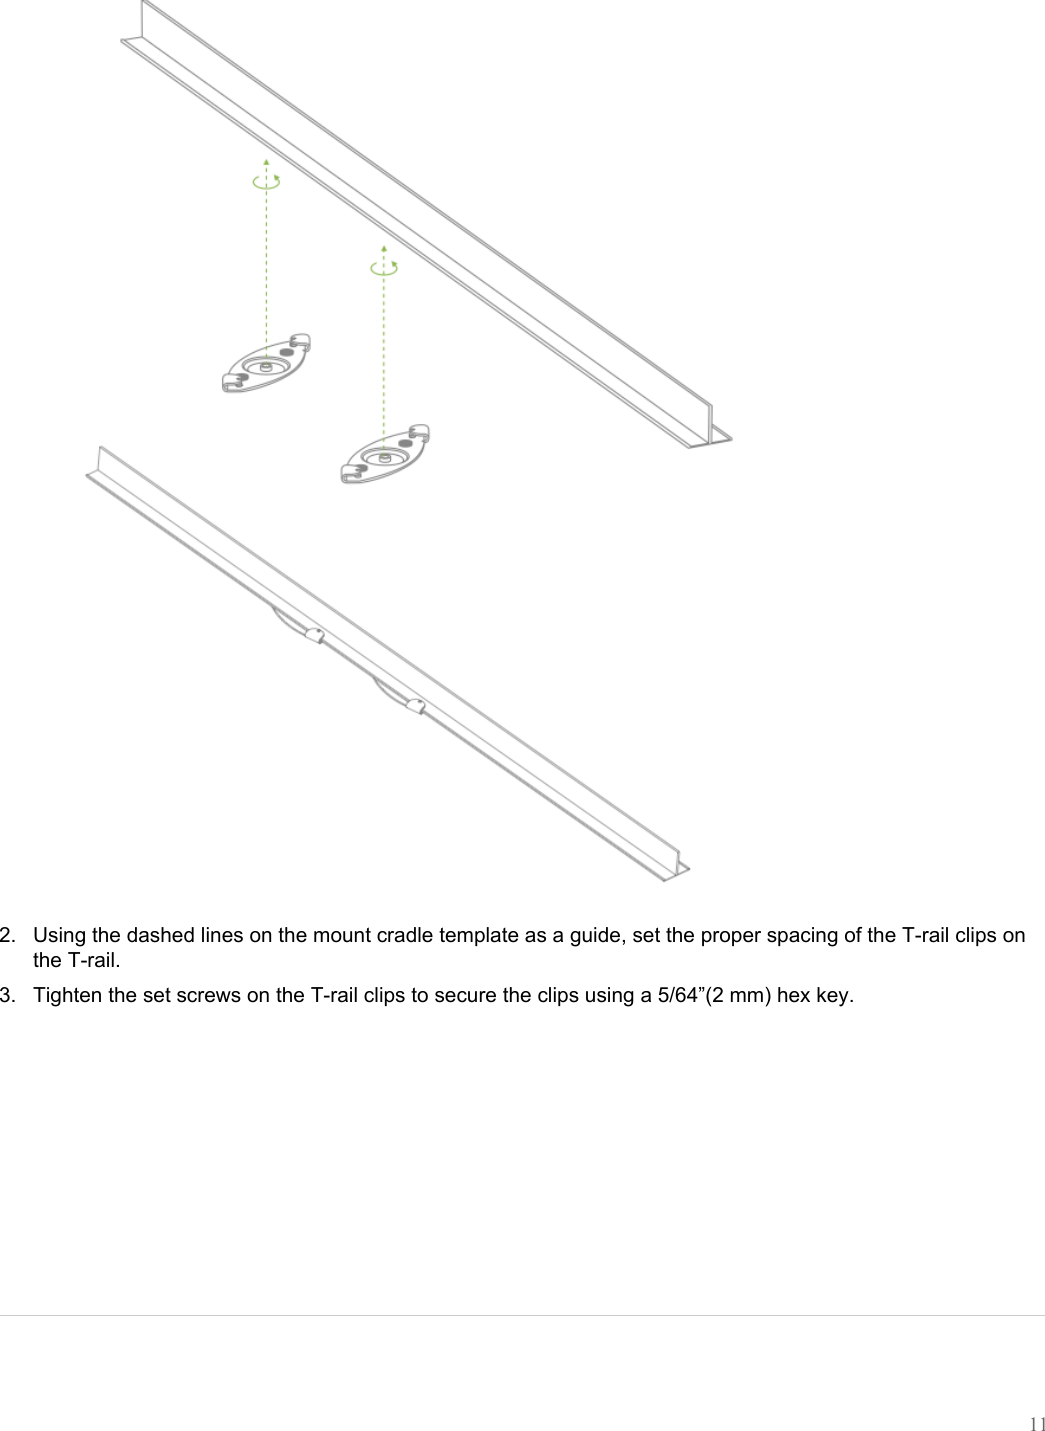 2. Using the dashed lines on the mount cradle template as a guide, set the proper spacing of the T-rail clips onthe T-rail.3. Tighten the set screws on the T-rail clips to secure the clips using a 5/64”(2 mm) hex key.11